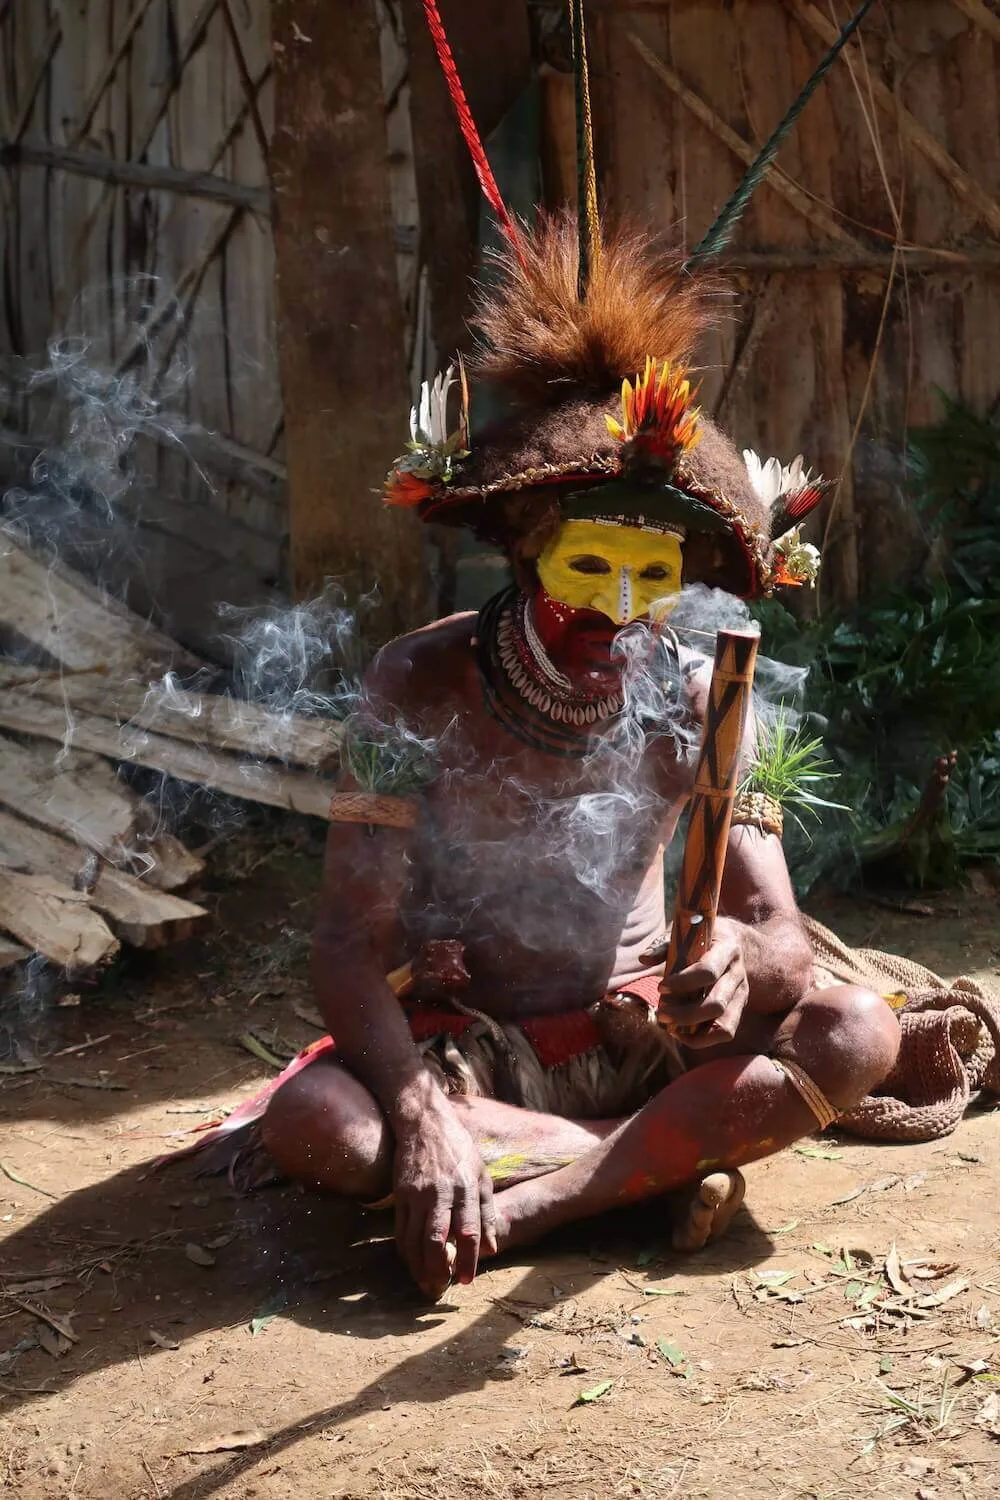 Tips for travelling to Papua New Guinea